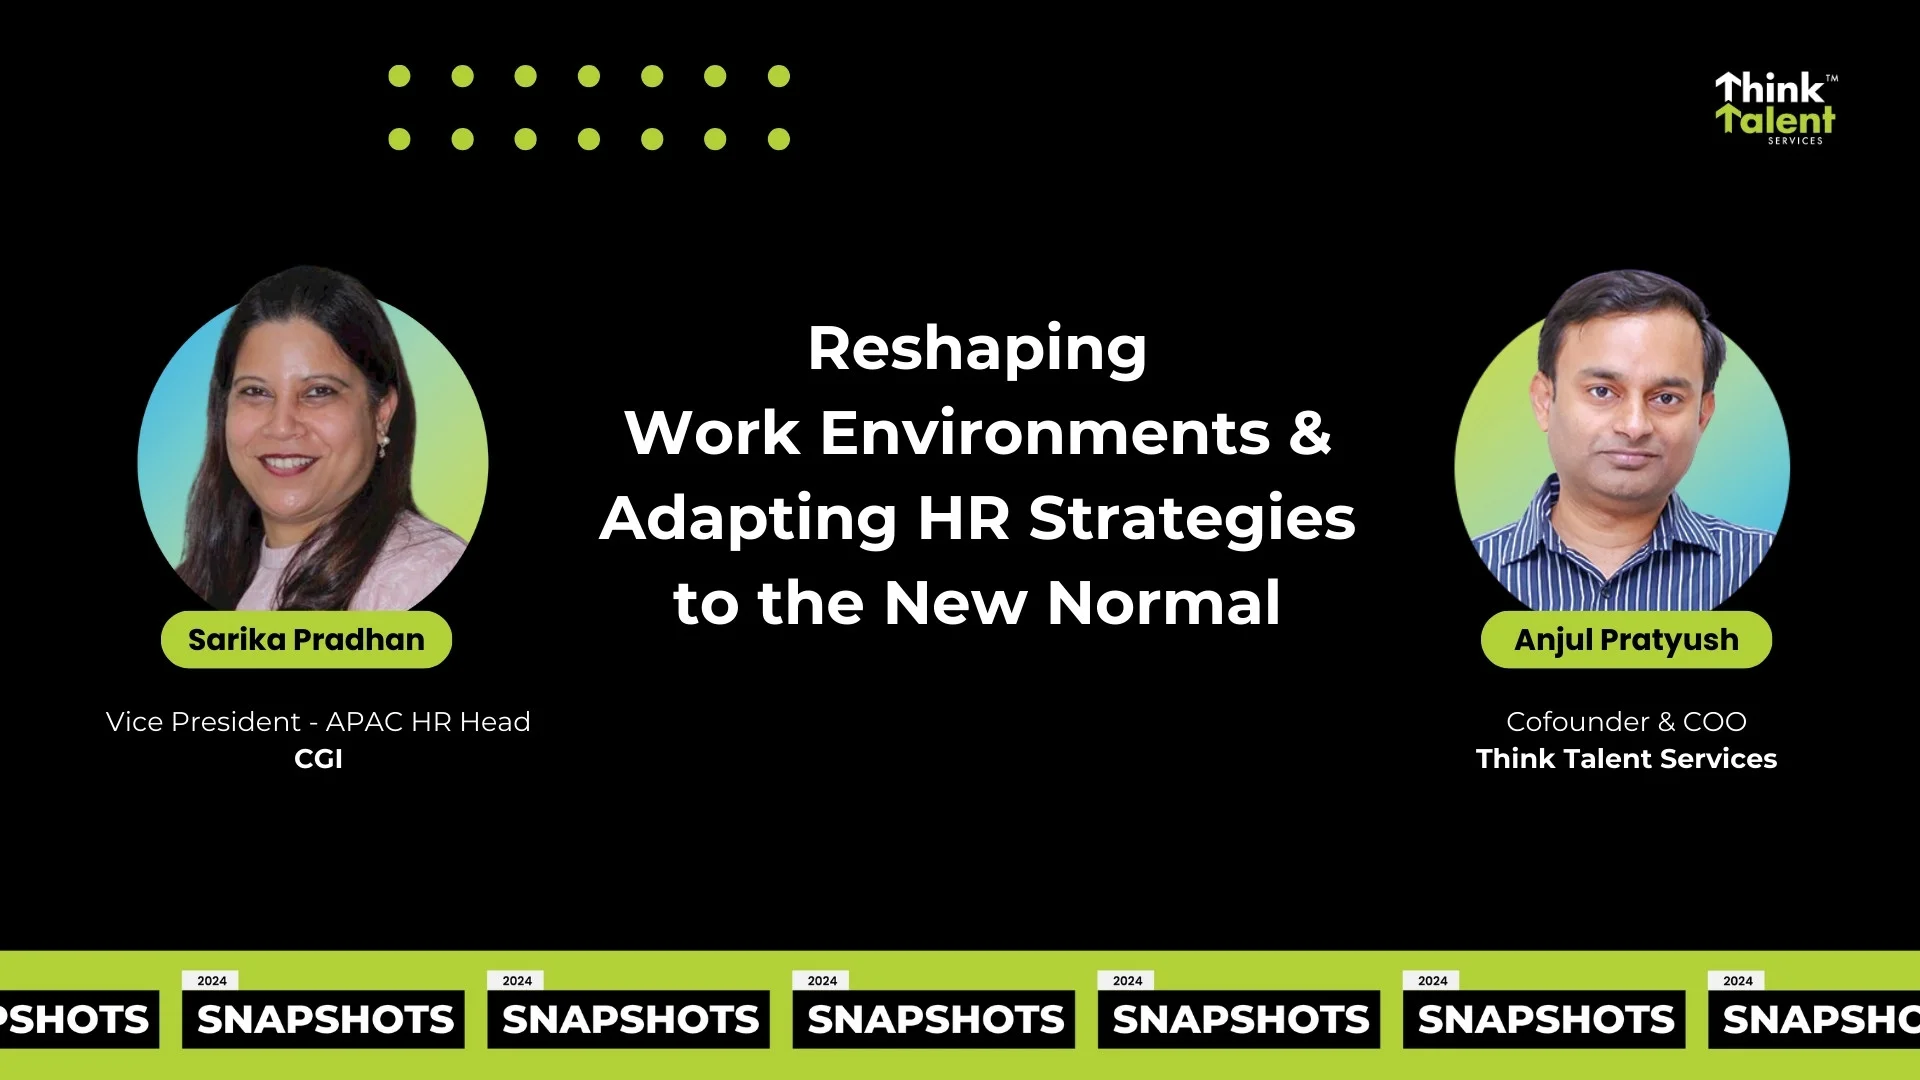 Reshaping Work Environments & Adapting HR Strategies to the New Normal